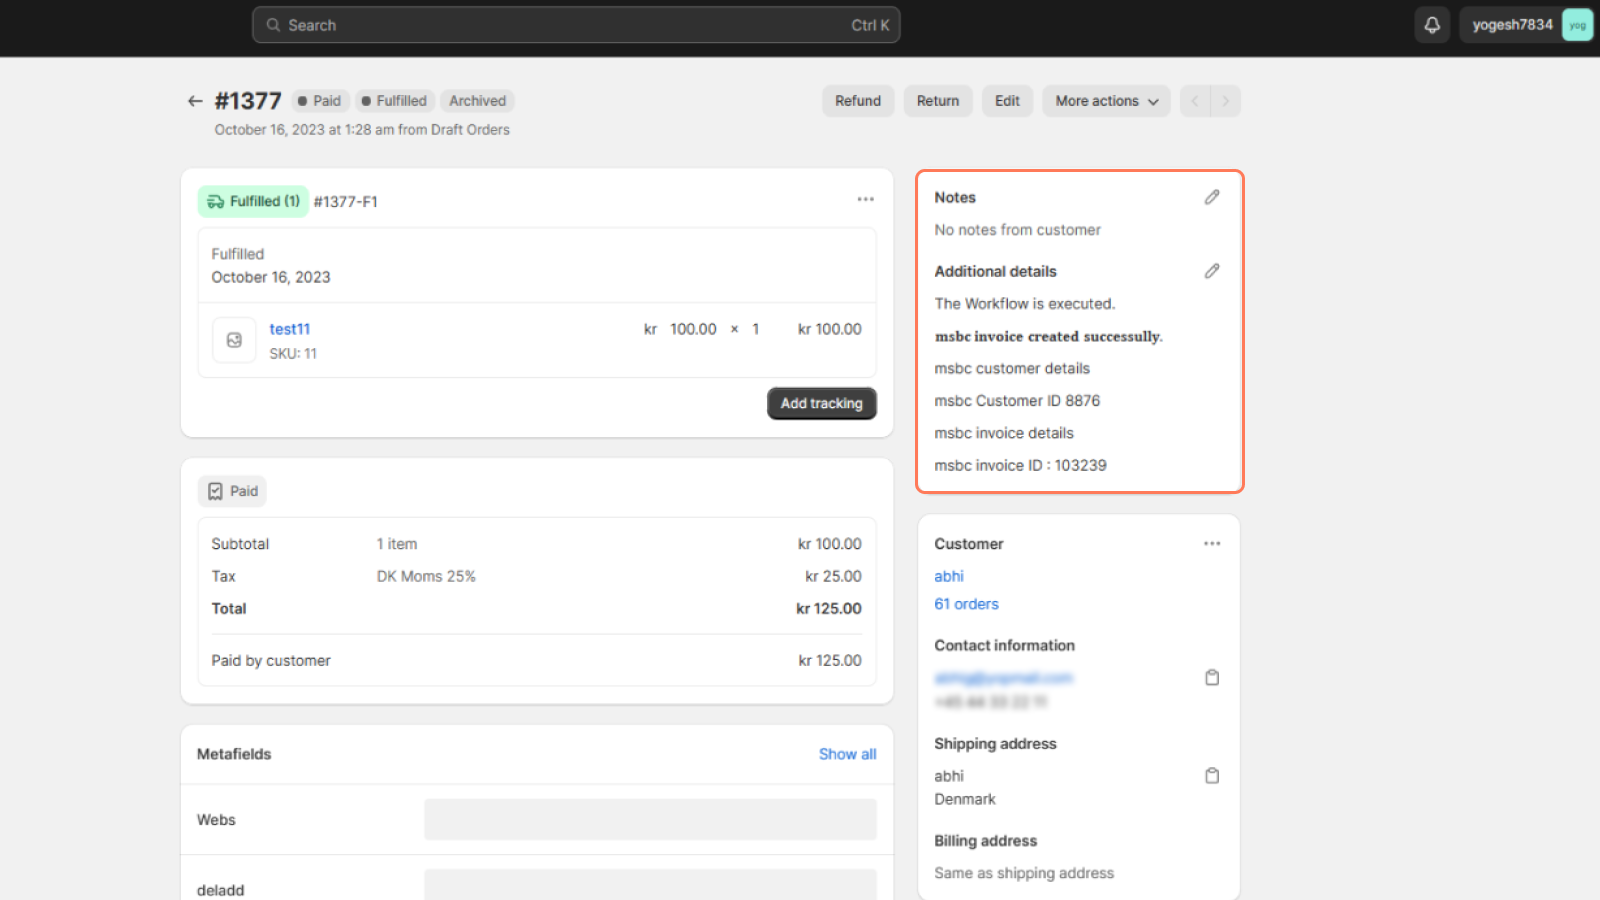 Sync updates in order timeline with customer and invoice details